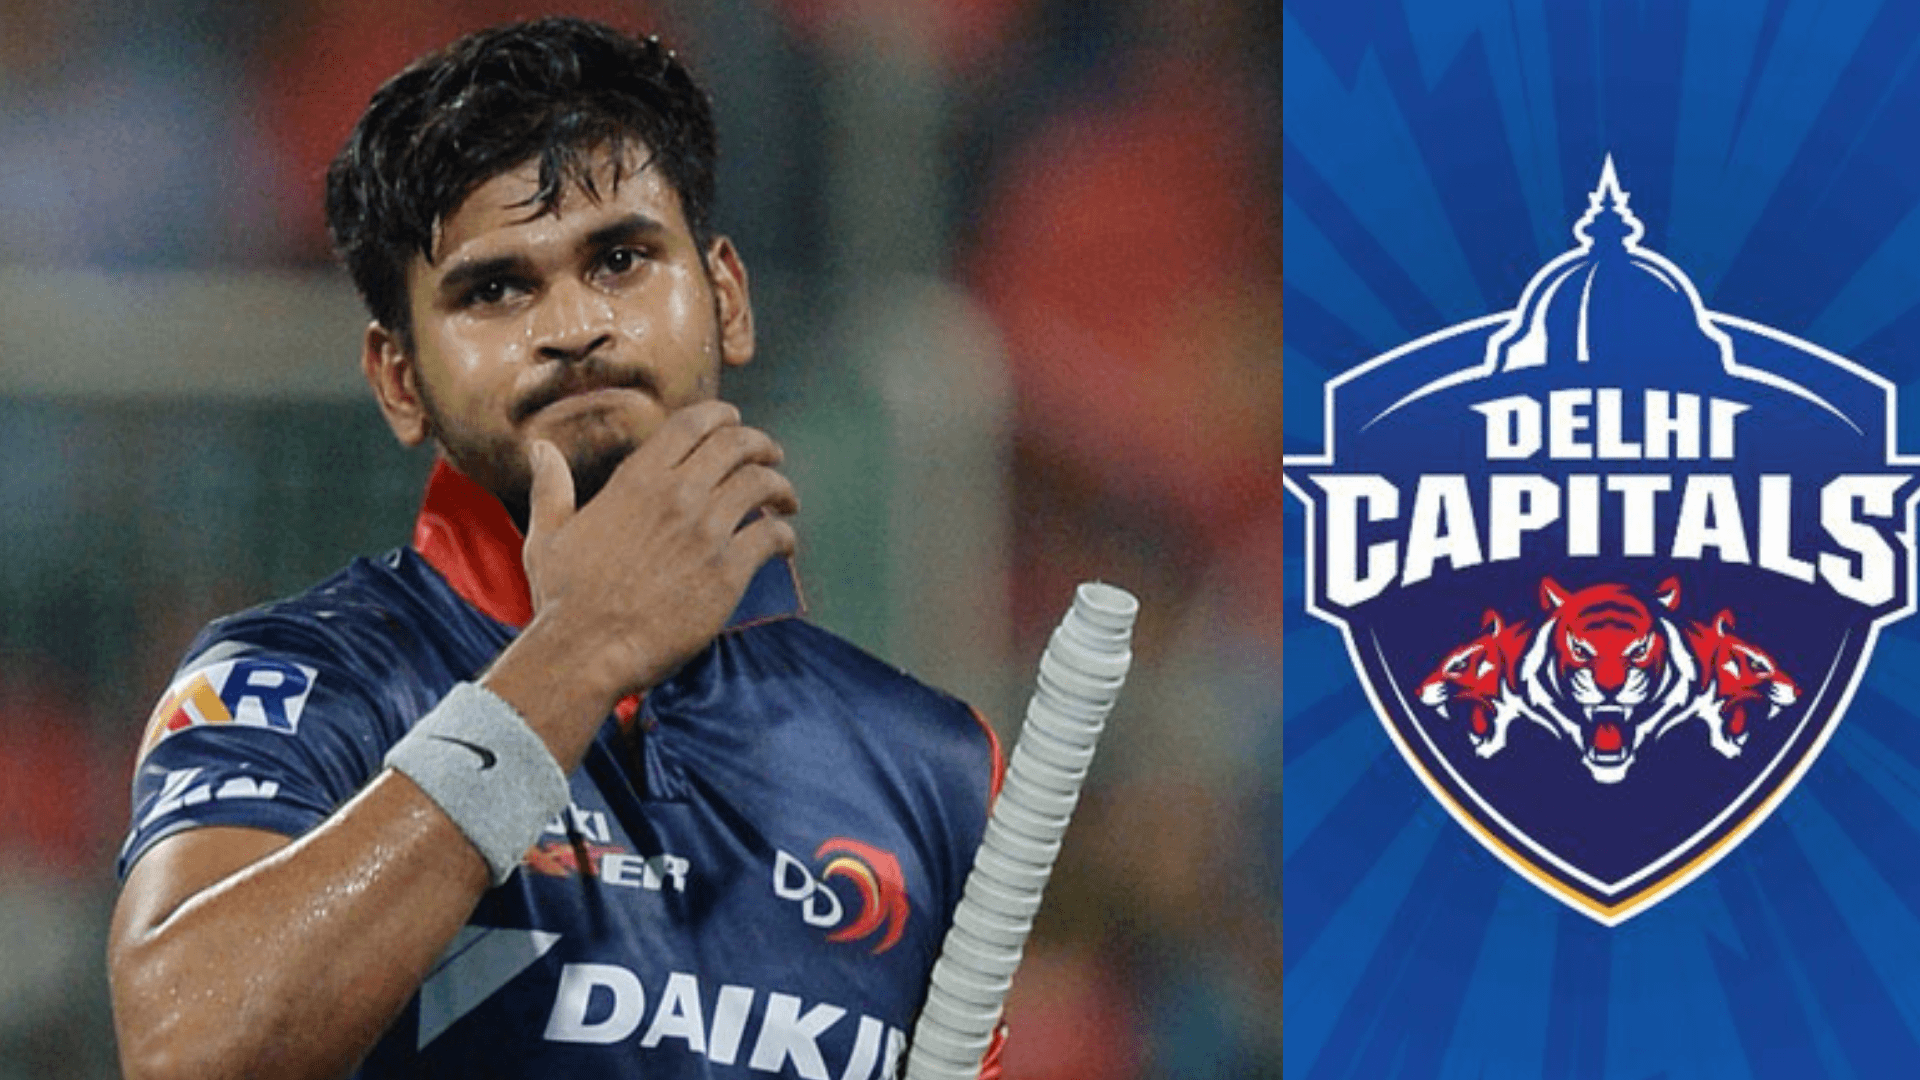 IPL 2019 Auction DC: Auction Purse, Players Released and Retained